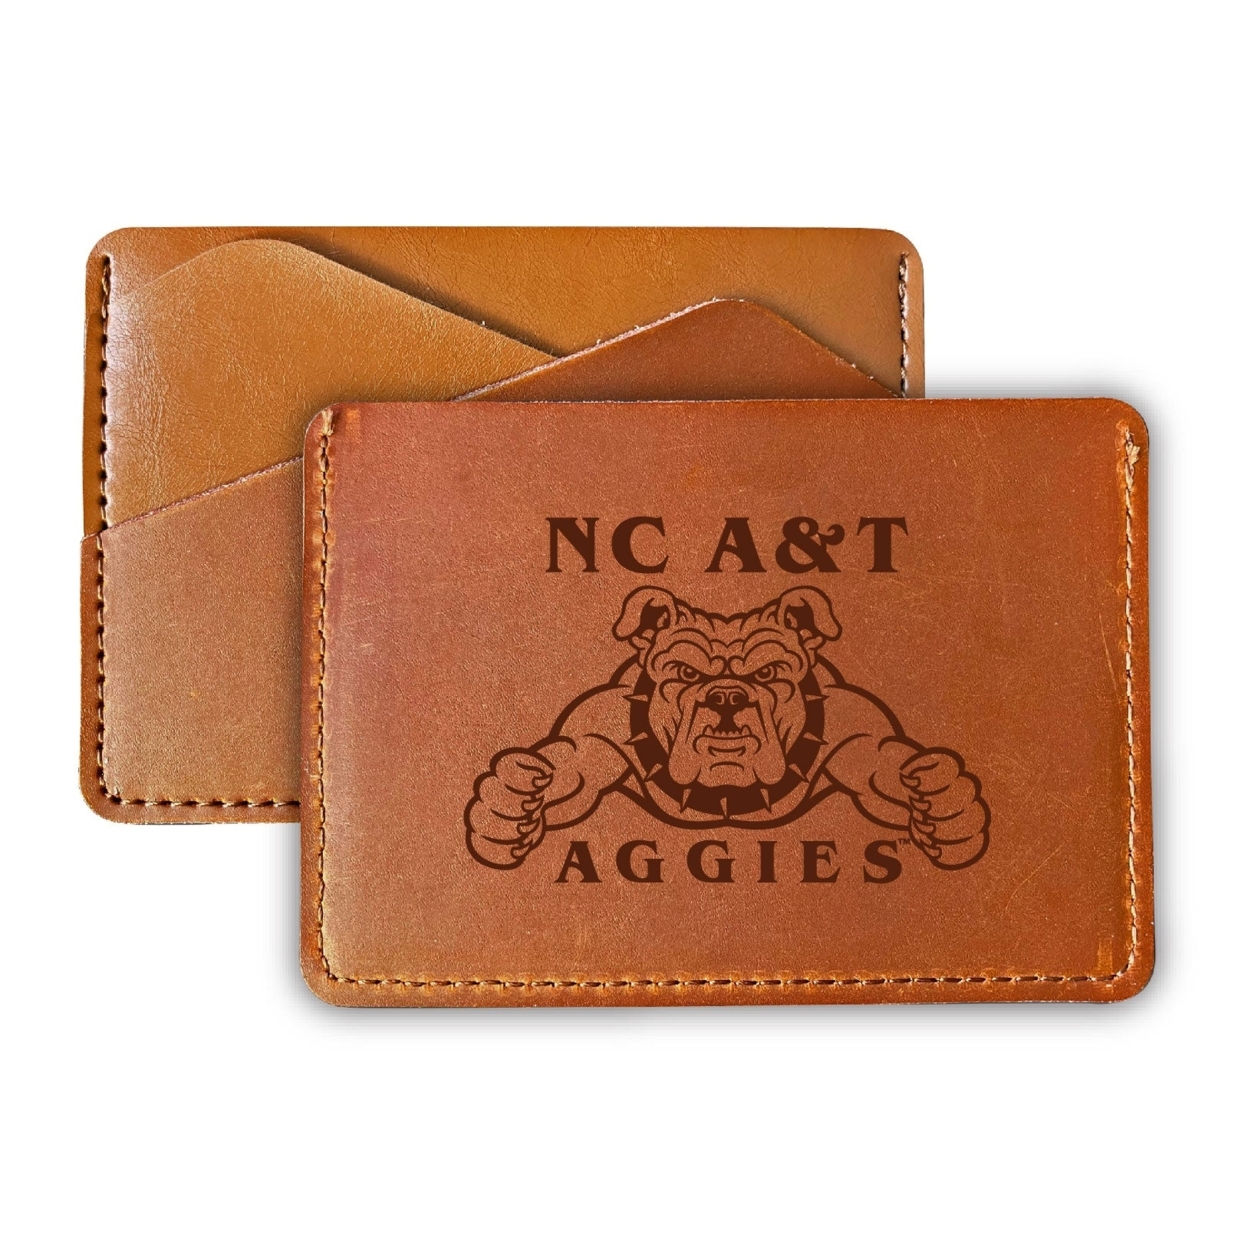 North Carolina A&T State Aggies College Leather Card Holder Wallet